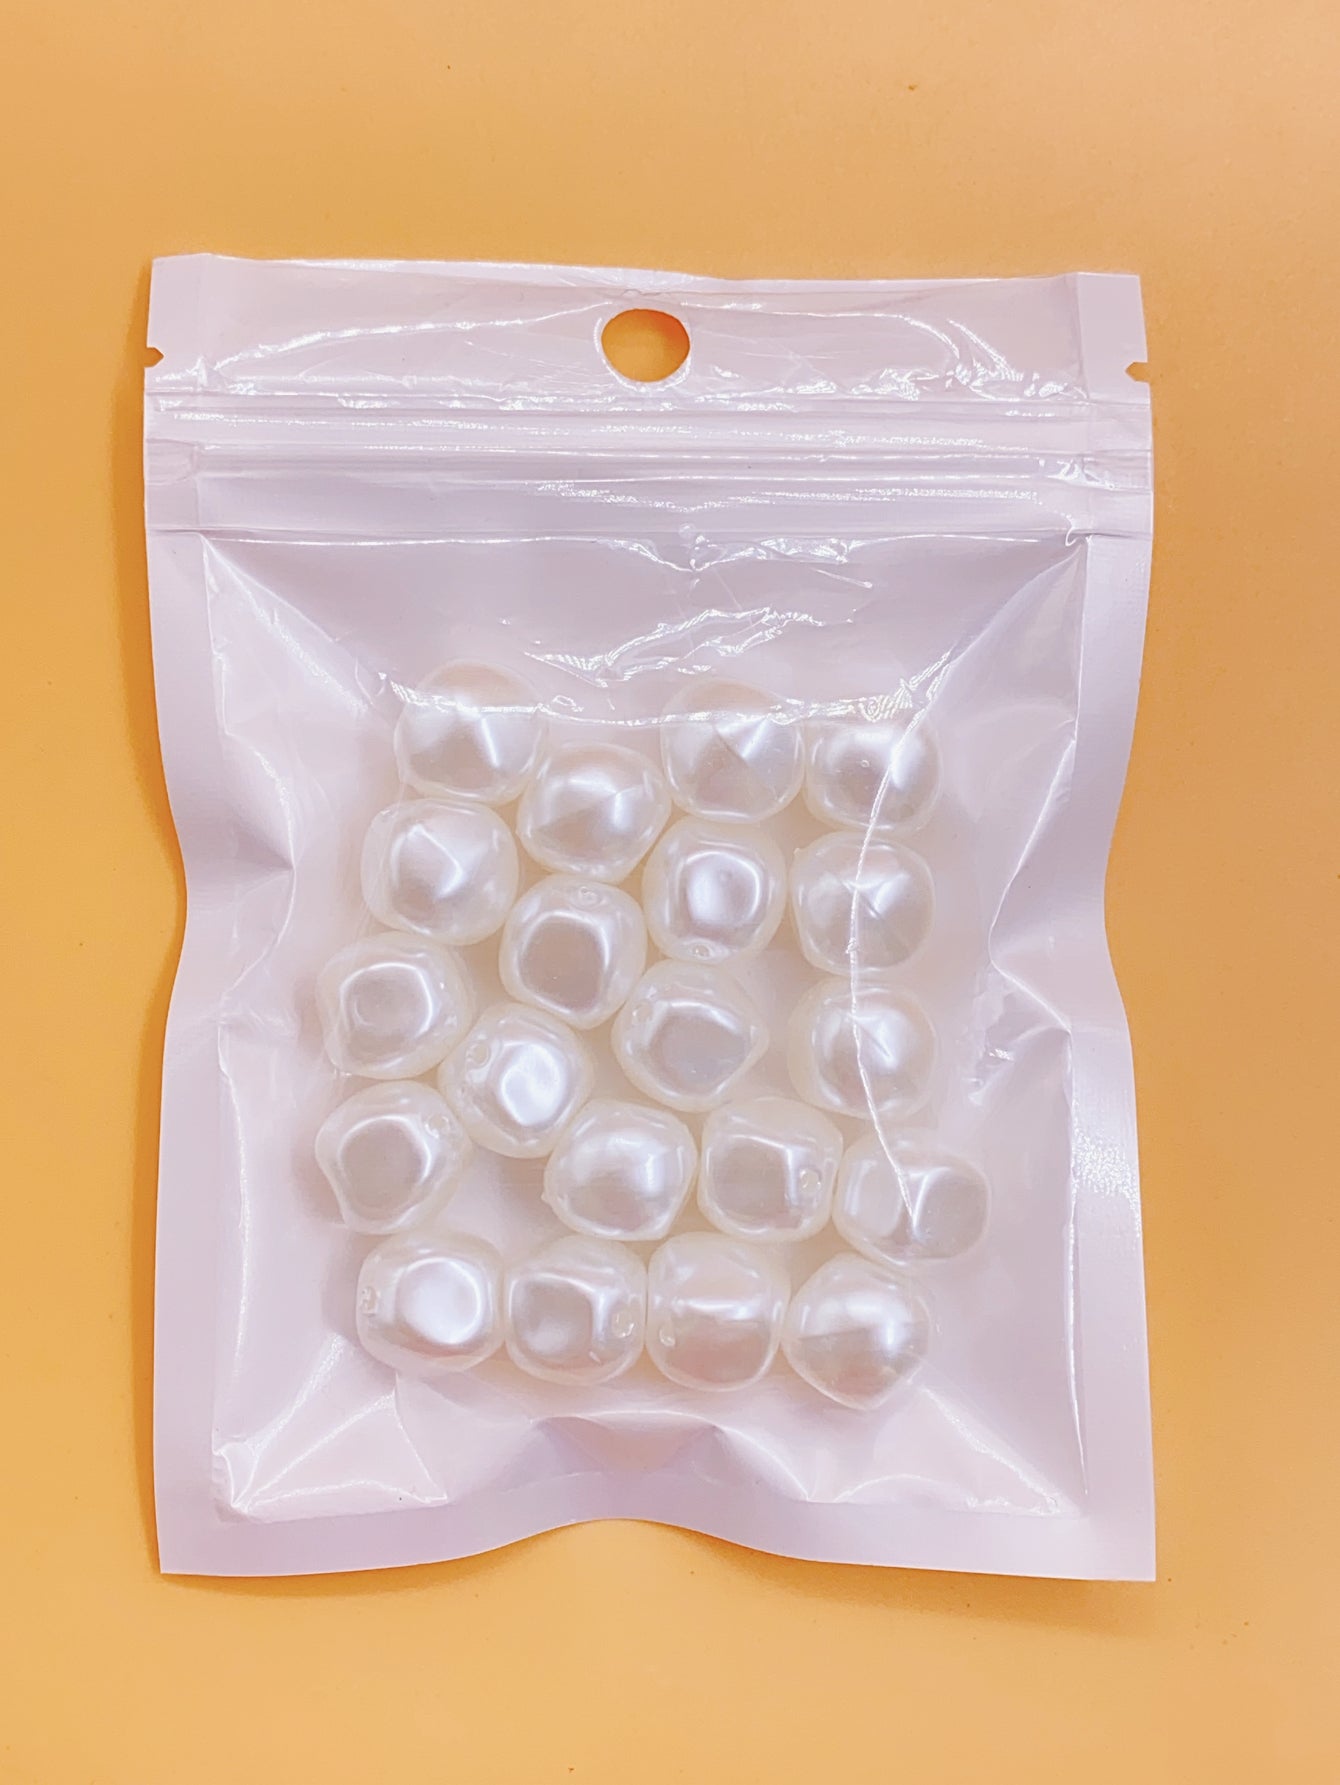 New highlight-shaped straight hole pearl diy accessories 20 pieces